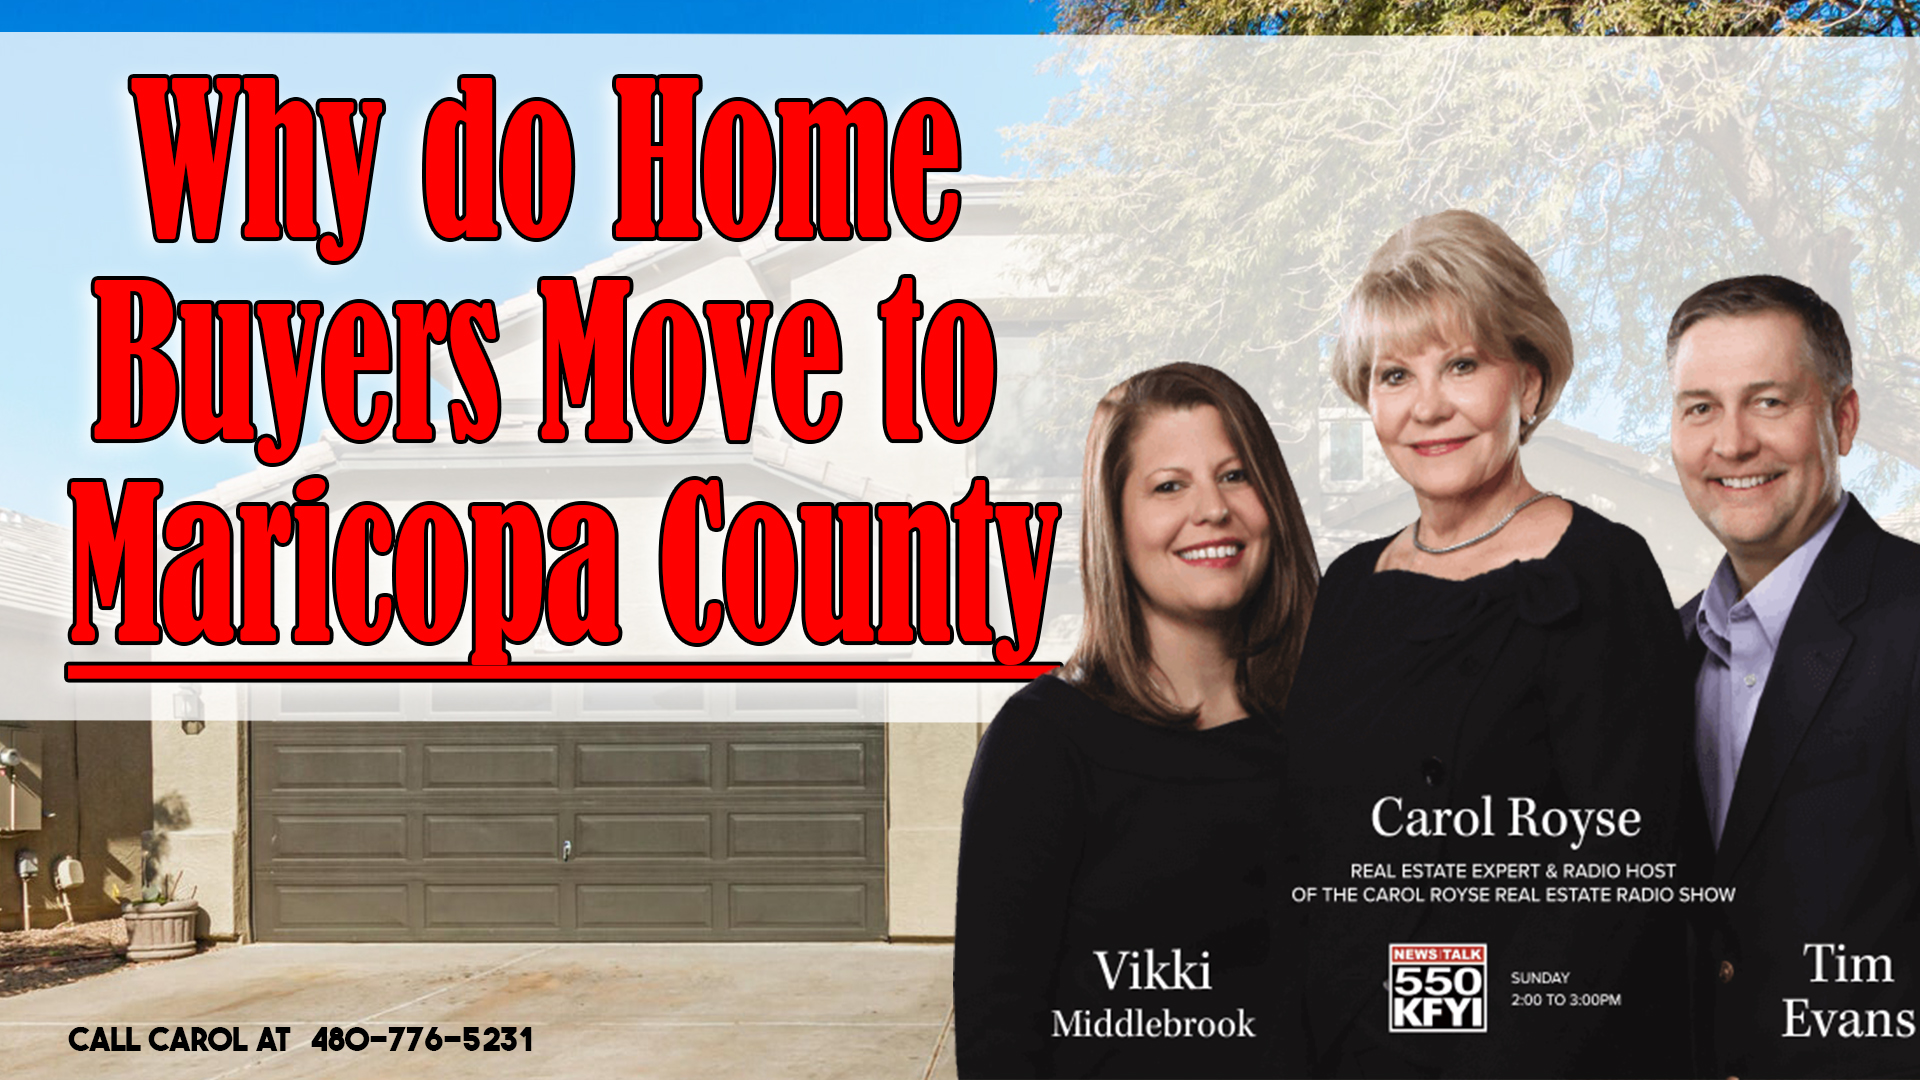 Why do Home Buyers Move to Maricopa County